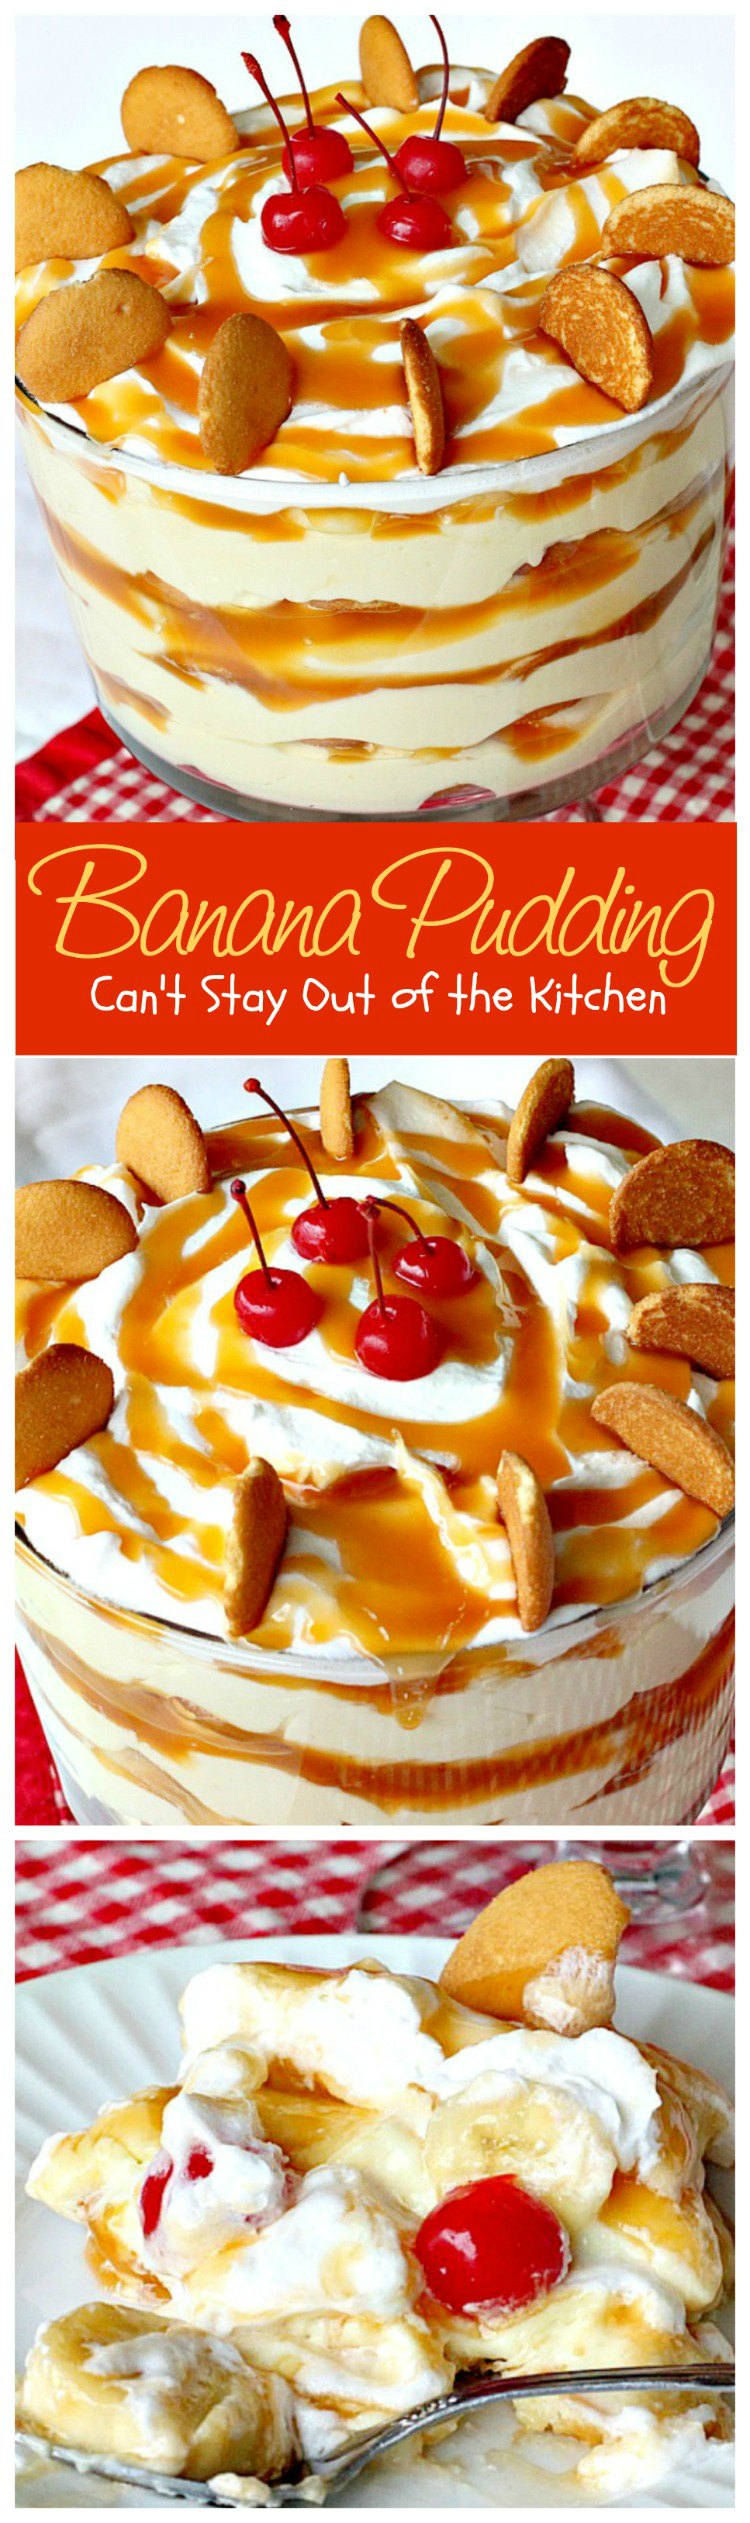 Banana Pudding | Can't Stay Out of the Kitchen